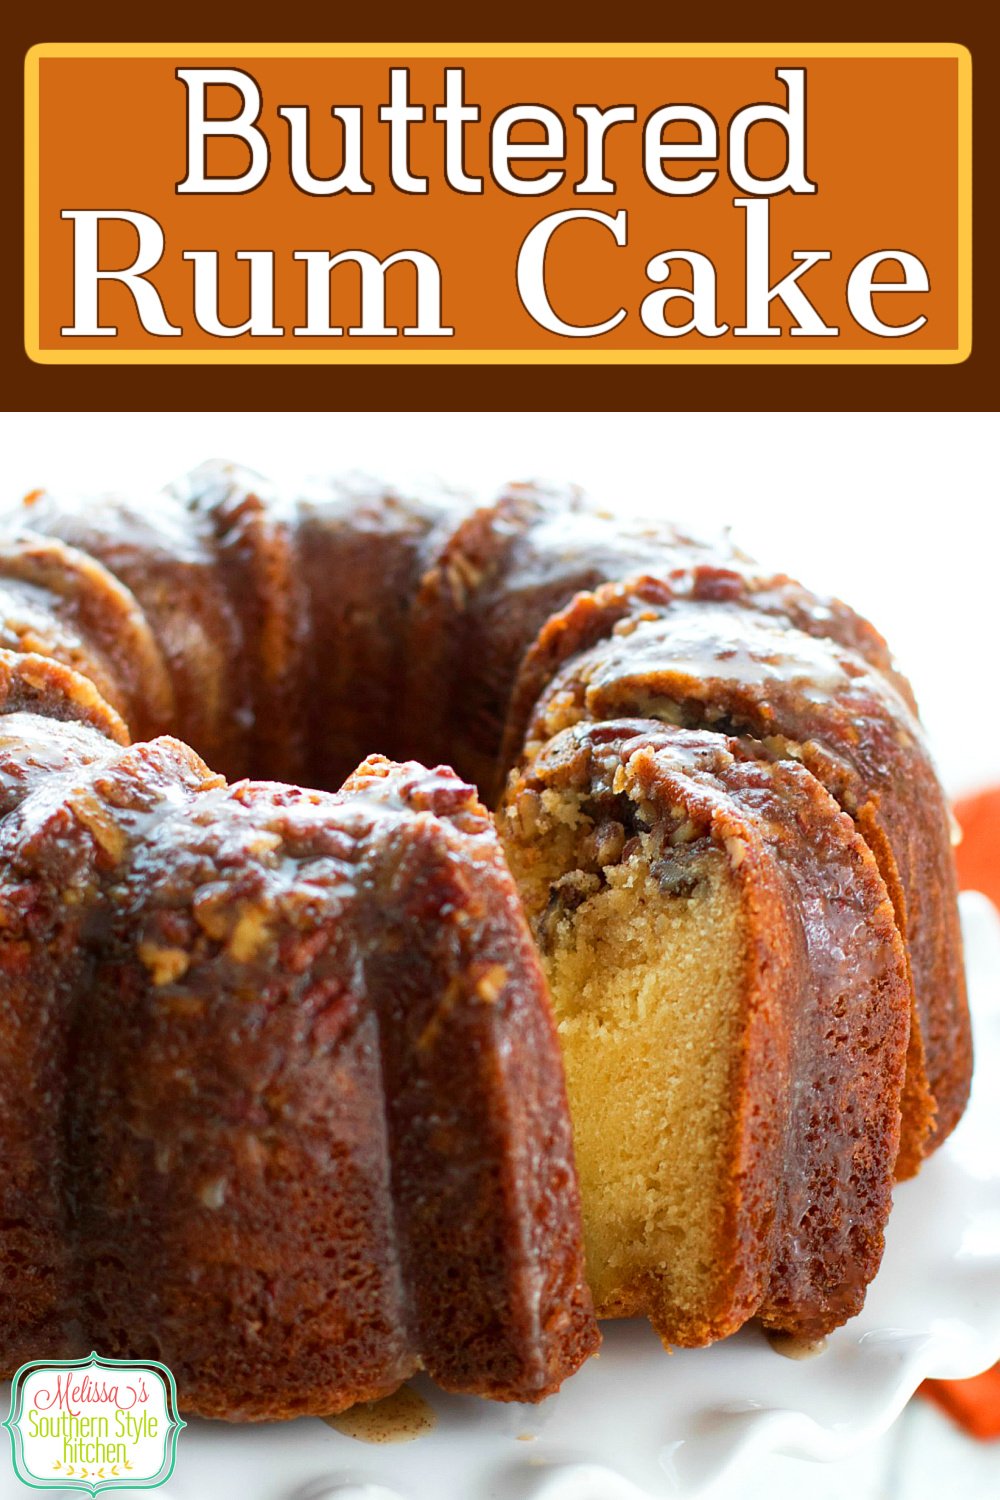 This insanely delicious homemade Buttered Rum Cake is holiday ready #butteredrum #butteredrumcake #cakes #cakerecipes #pecns #pecancake #desserts #dessertfoodrecipes #holidaybaking #holidays #rum #southernrecipes #southernfood via @melissasssk